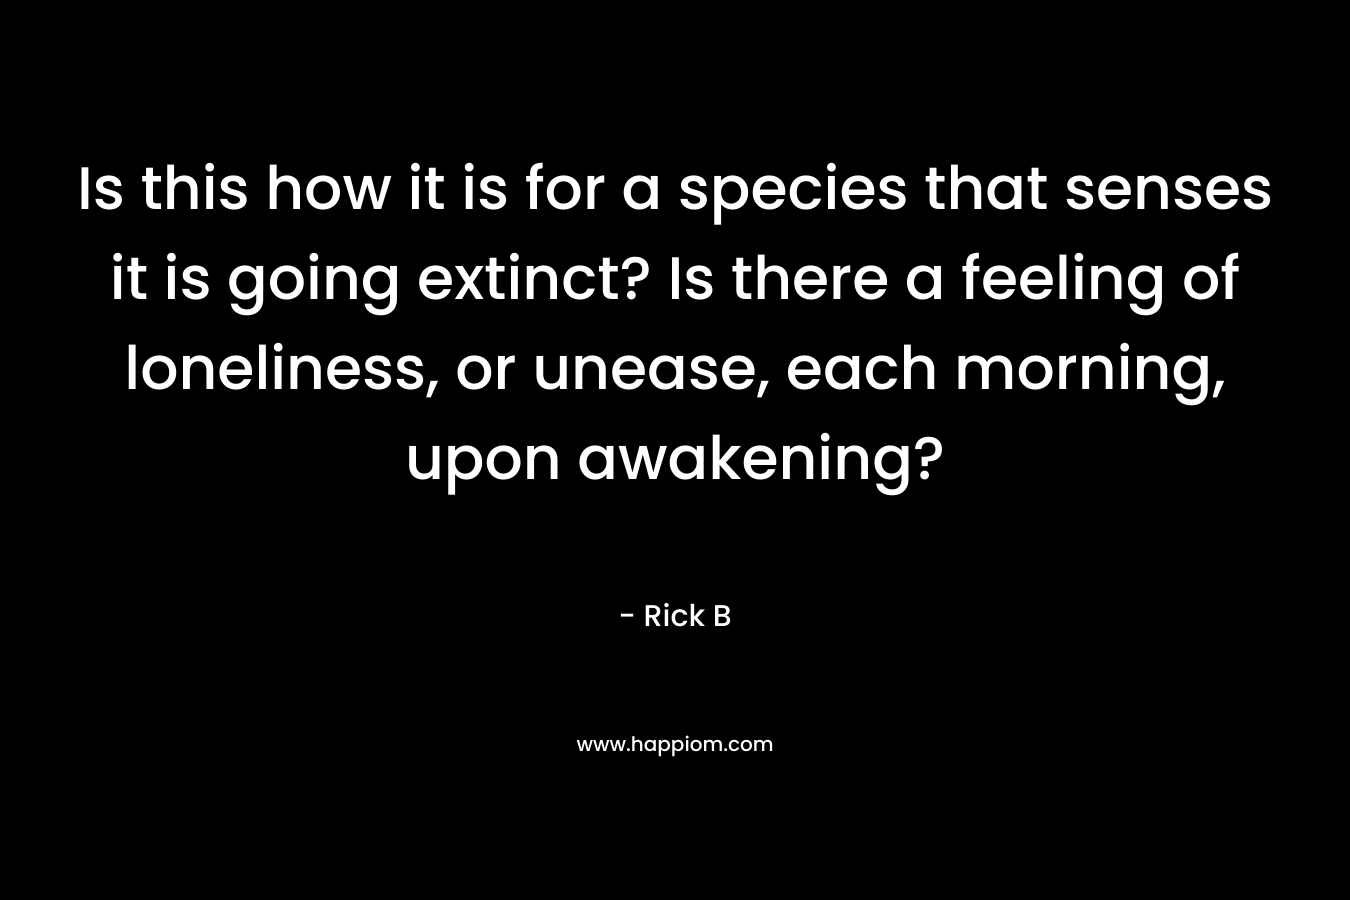 Is this how it is for a species that senses it is going extinct? Is there a feeling of loneliness, or unease, each morning, upon awakening?